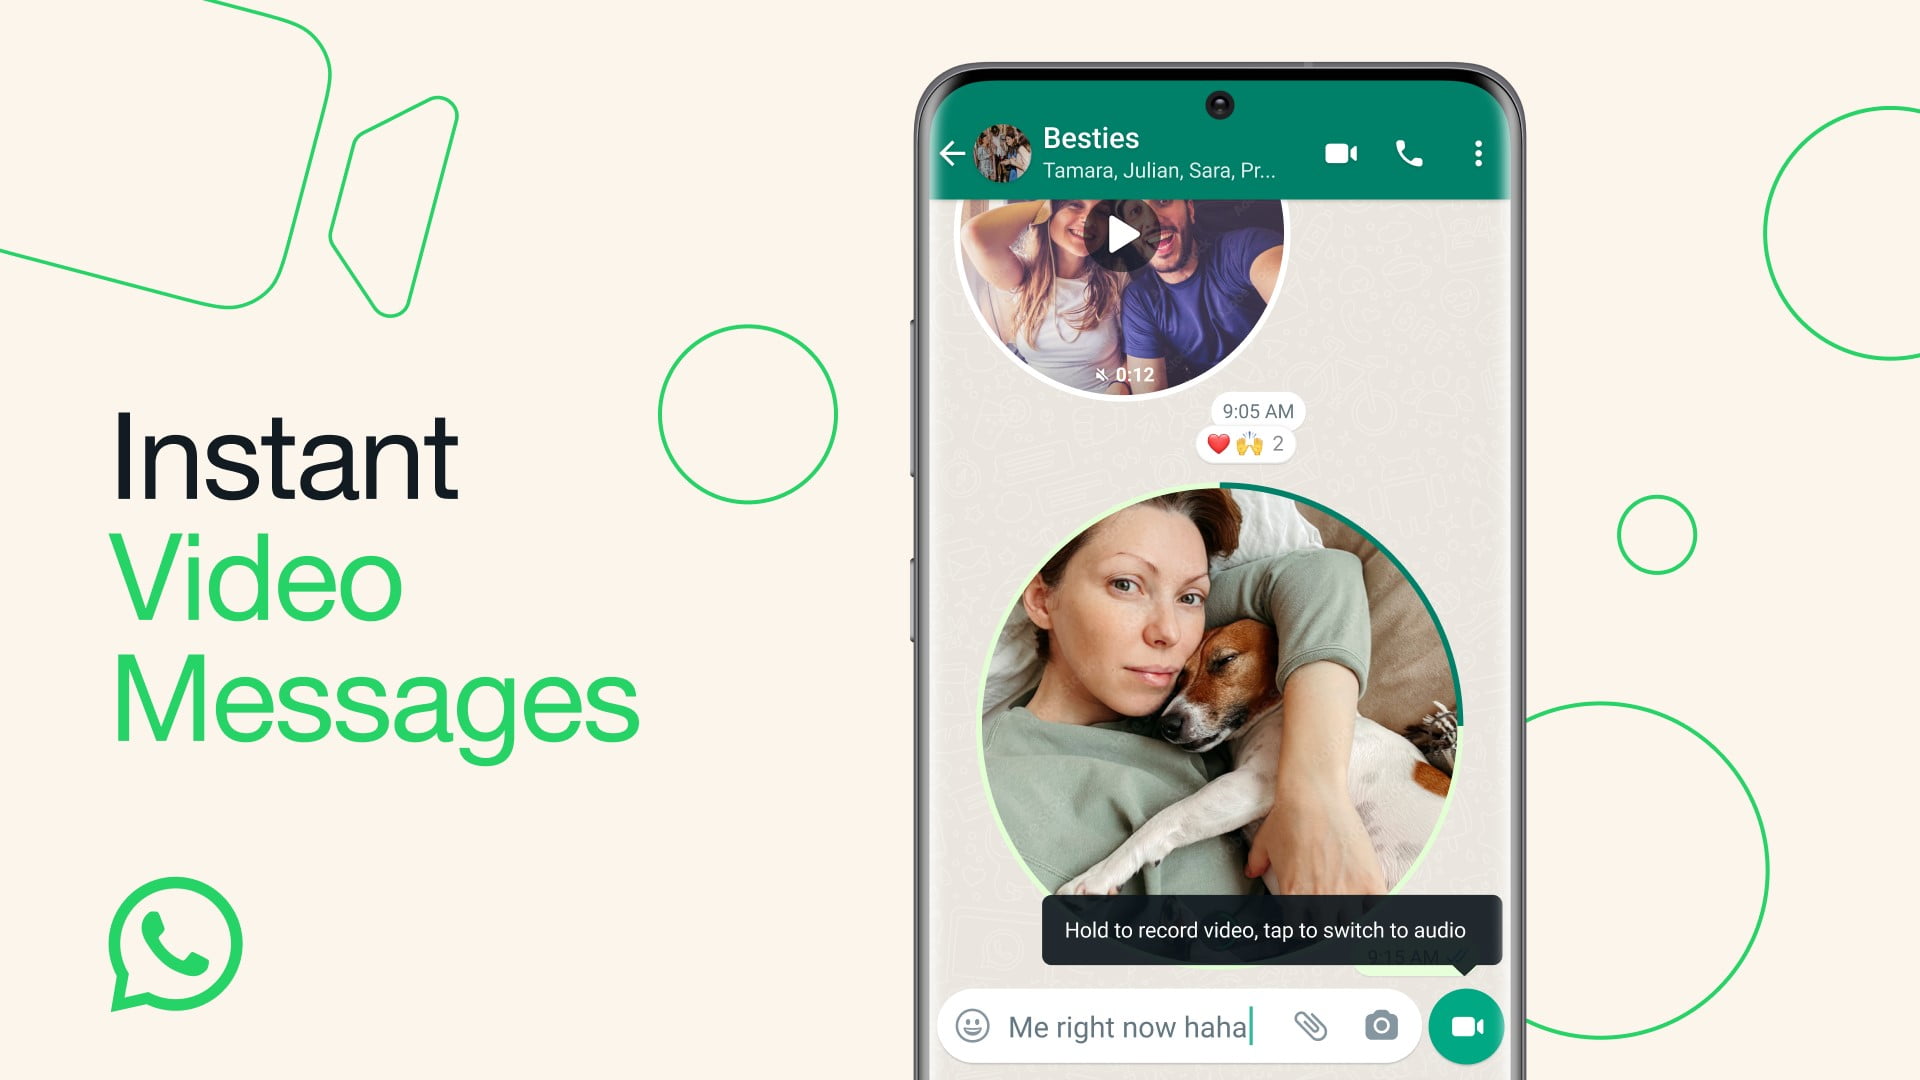 WhatsApp instant video messages